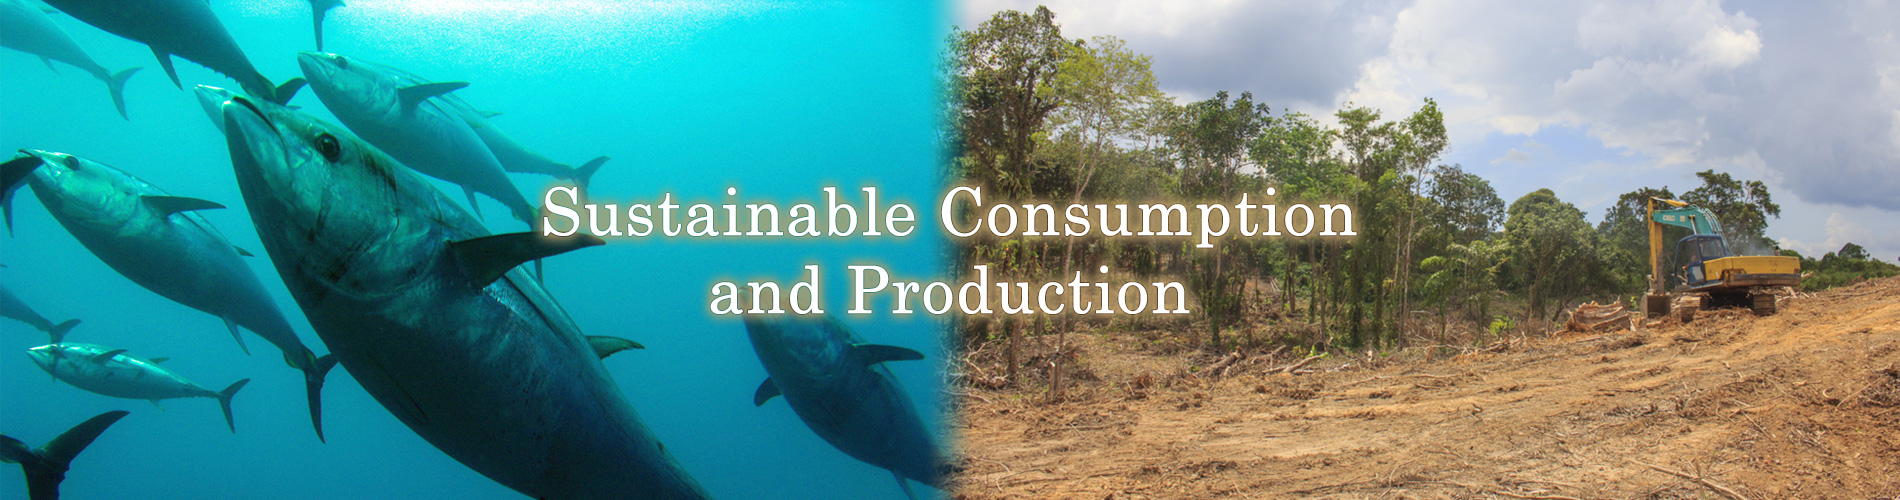 Sustainable Consumption and Production